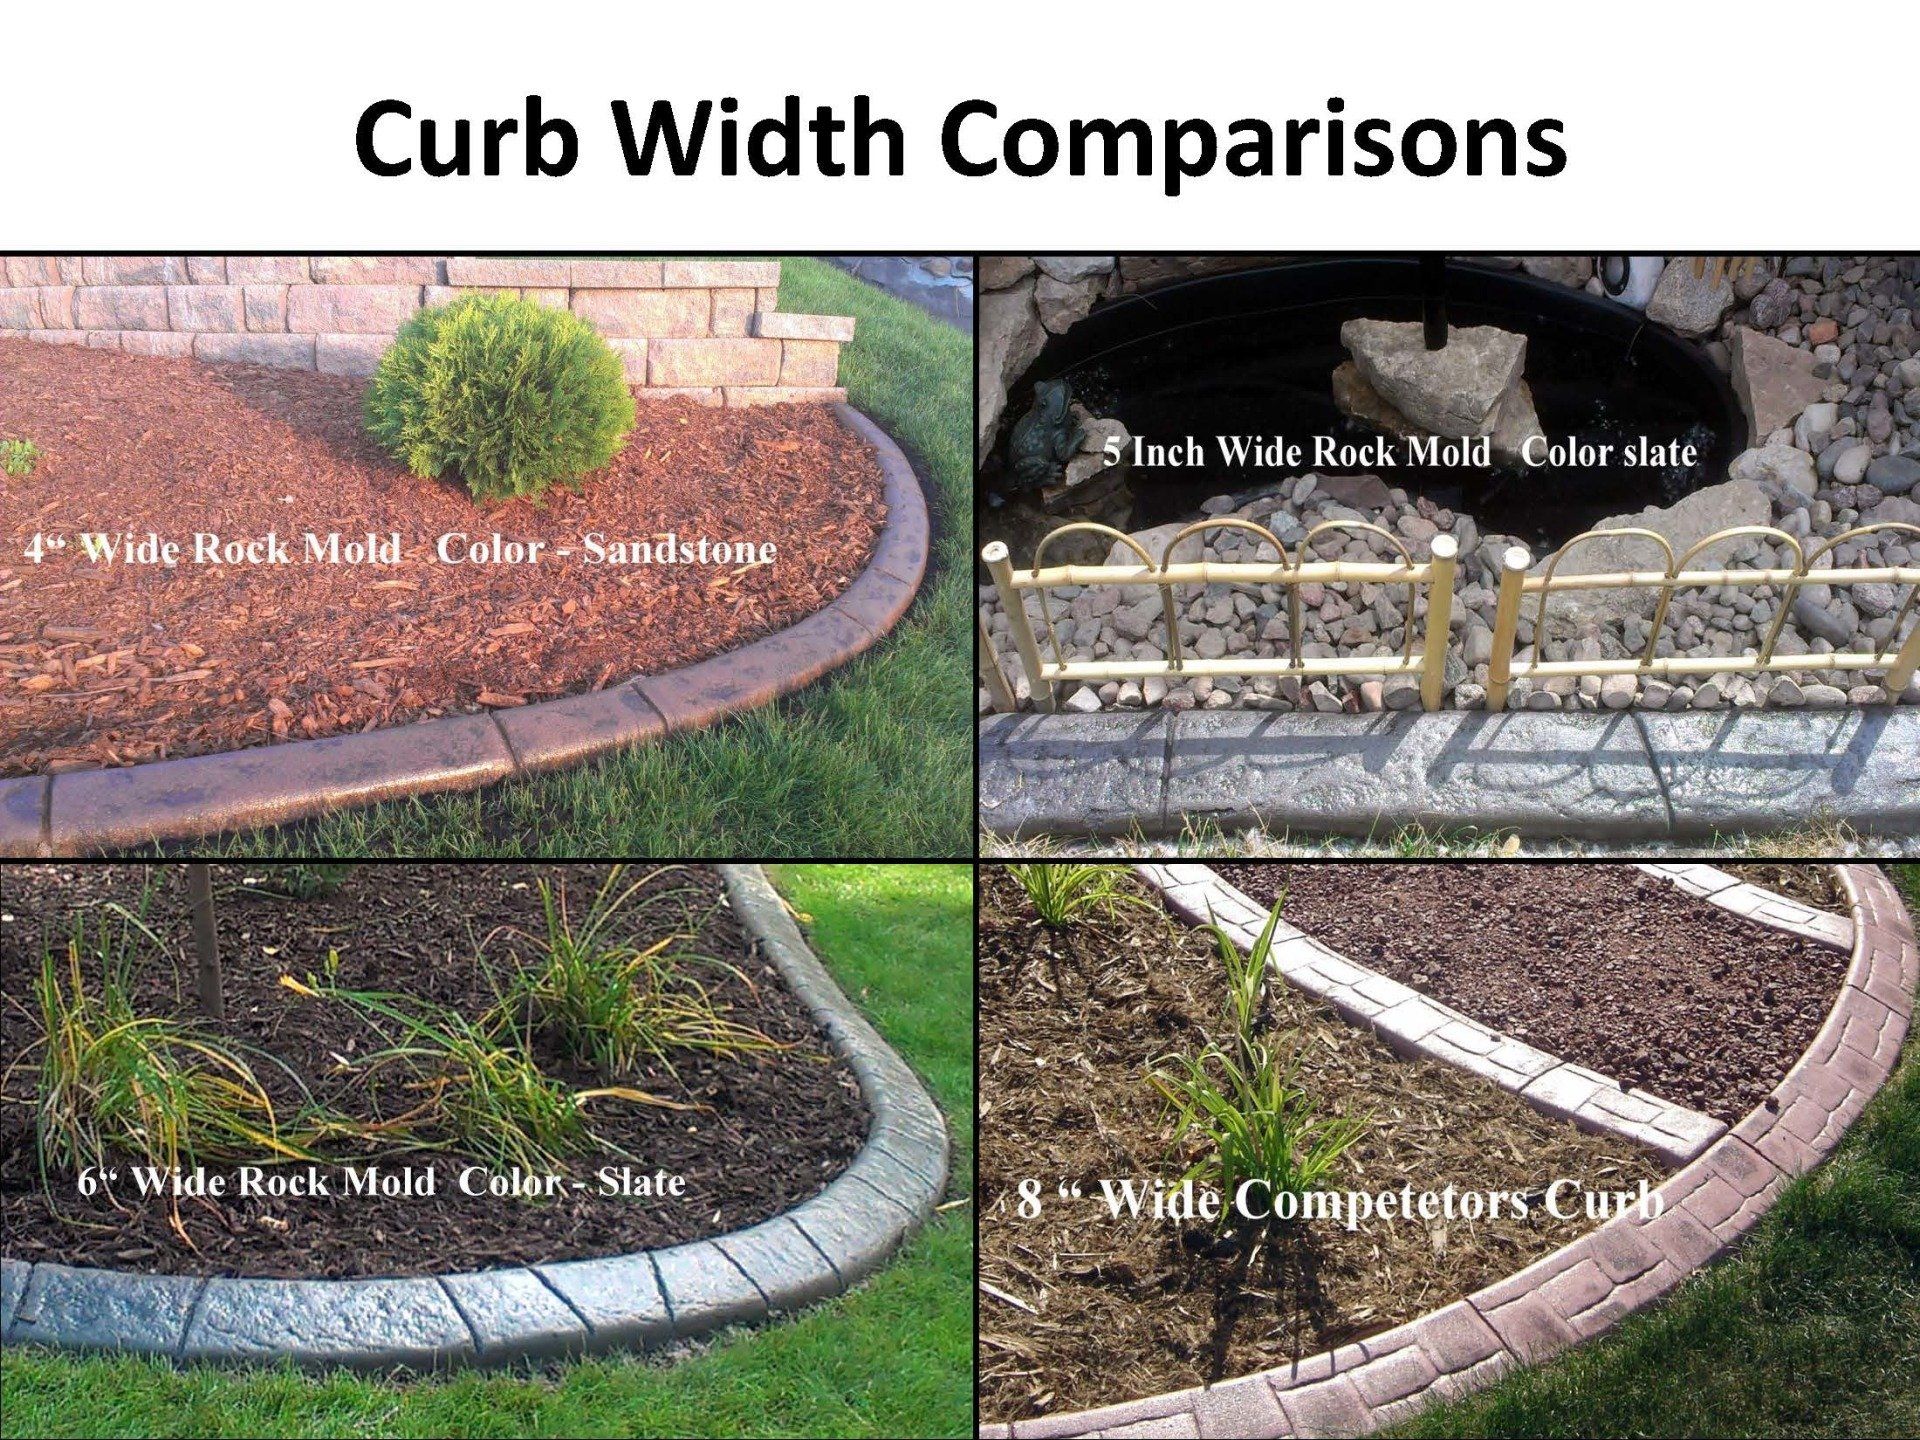 CurbScape Curb Width Comparisons